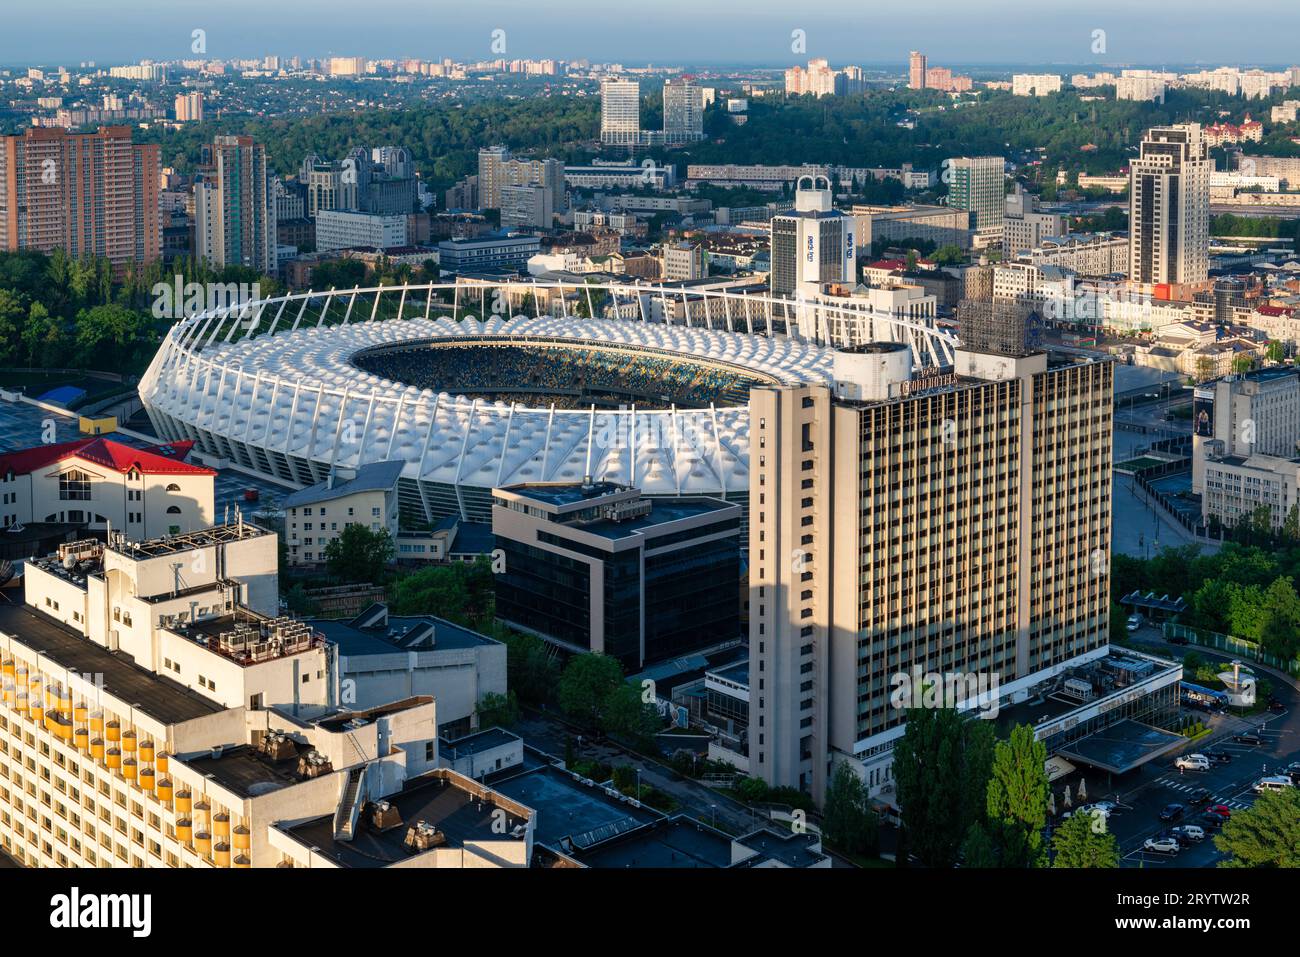 Kyiv, Ukraine, May 13 2014, an unusual view from above on famous Olympic Stadium Stock Photo